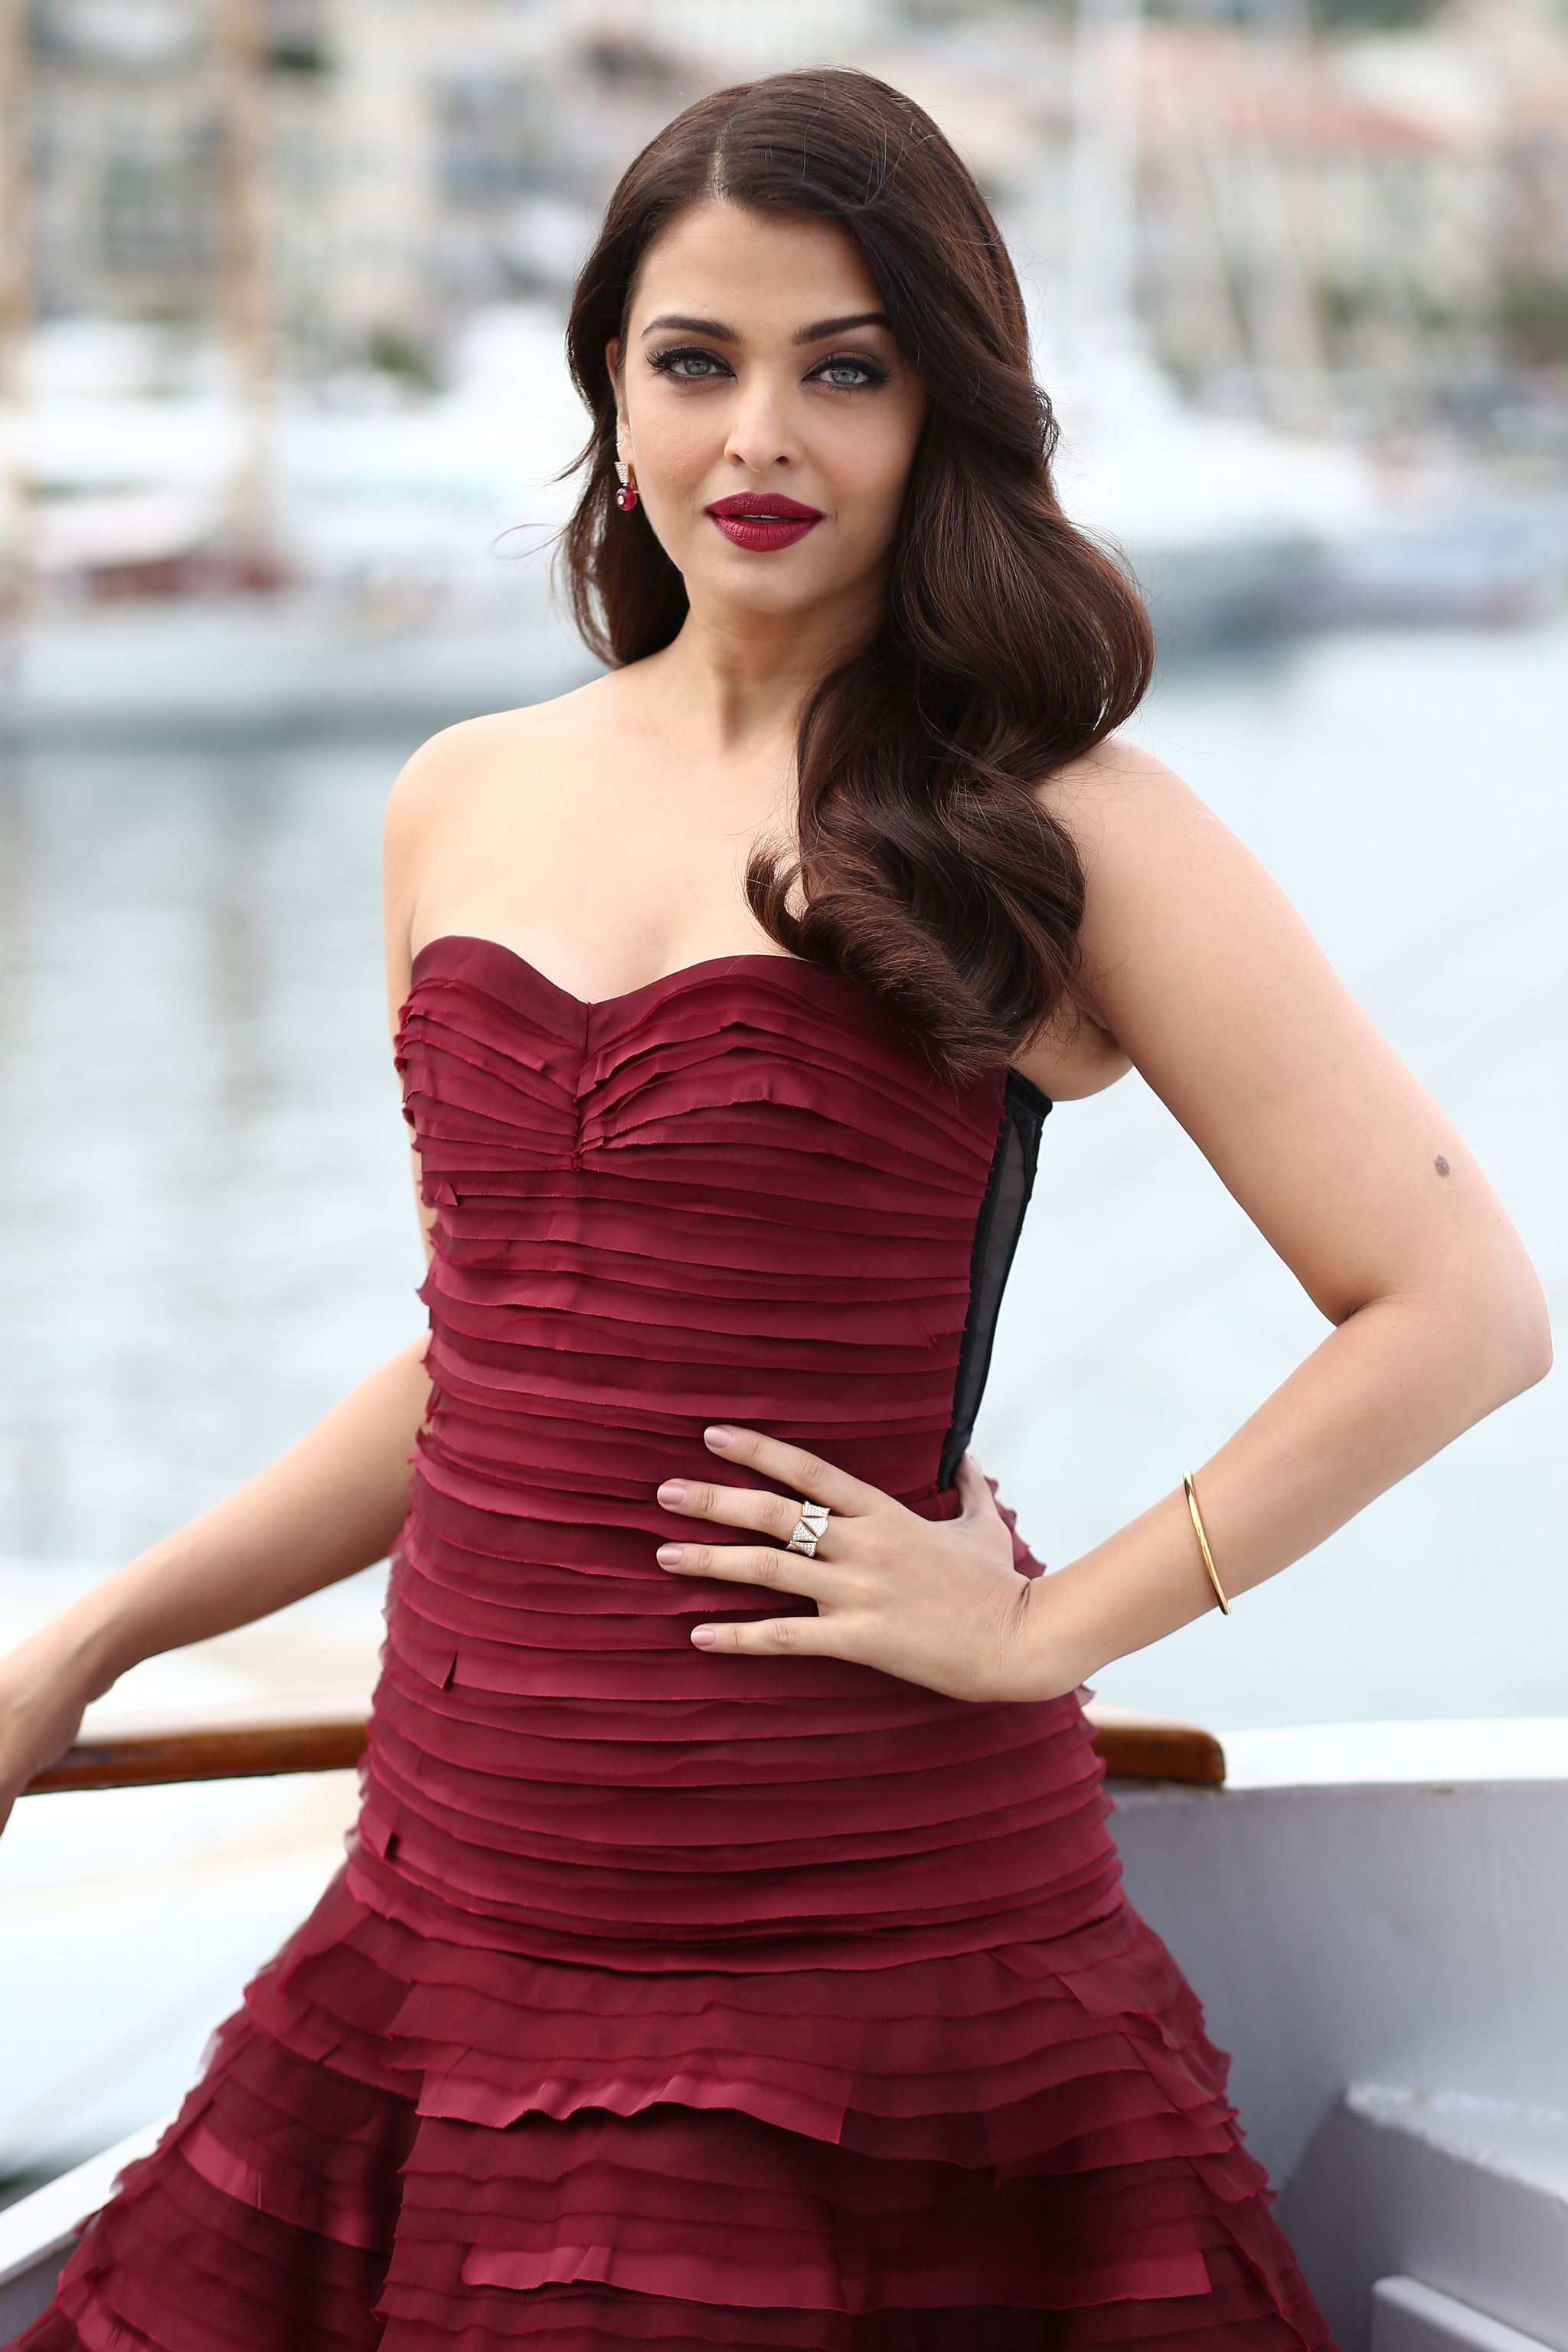 List of awards and nominations received by Aishwarya Rai Bachchan